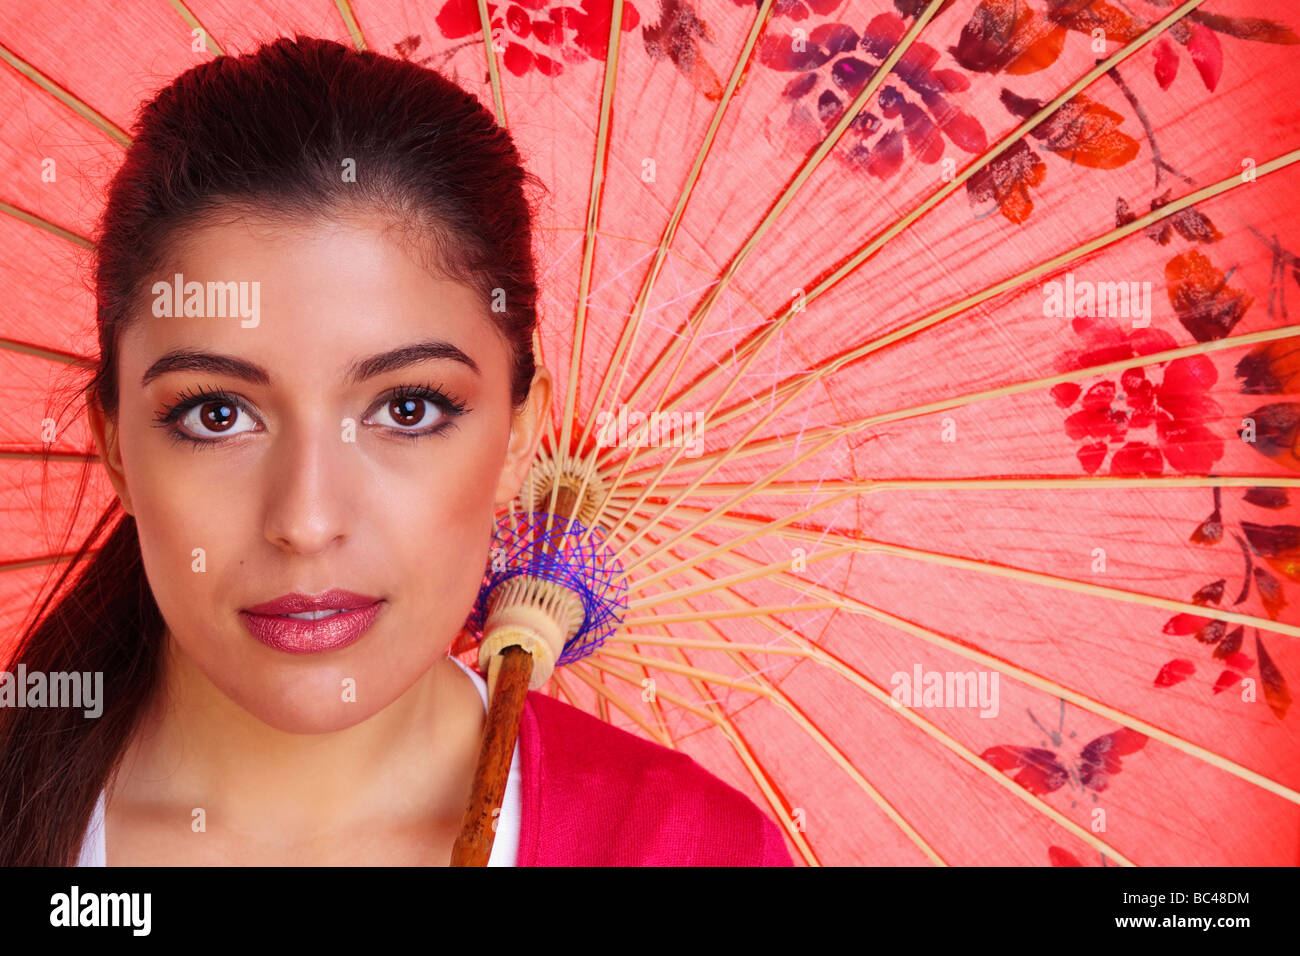 Beauty shot of a young brunette woman with brown eyes holding a red chinese umbrella Stock Photo